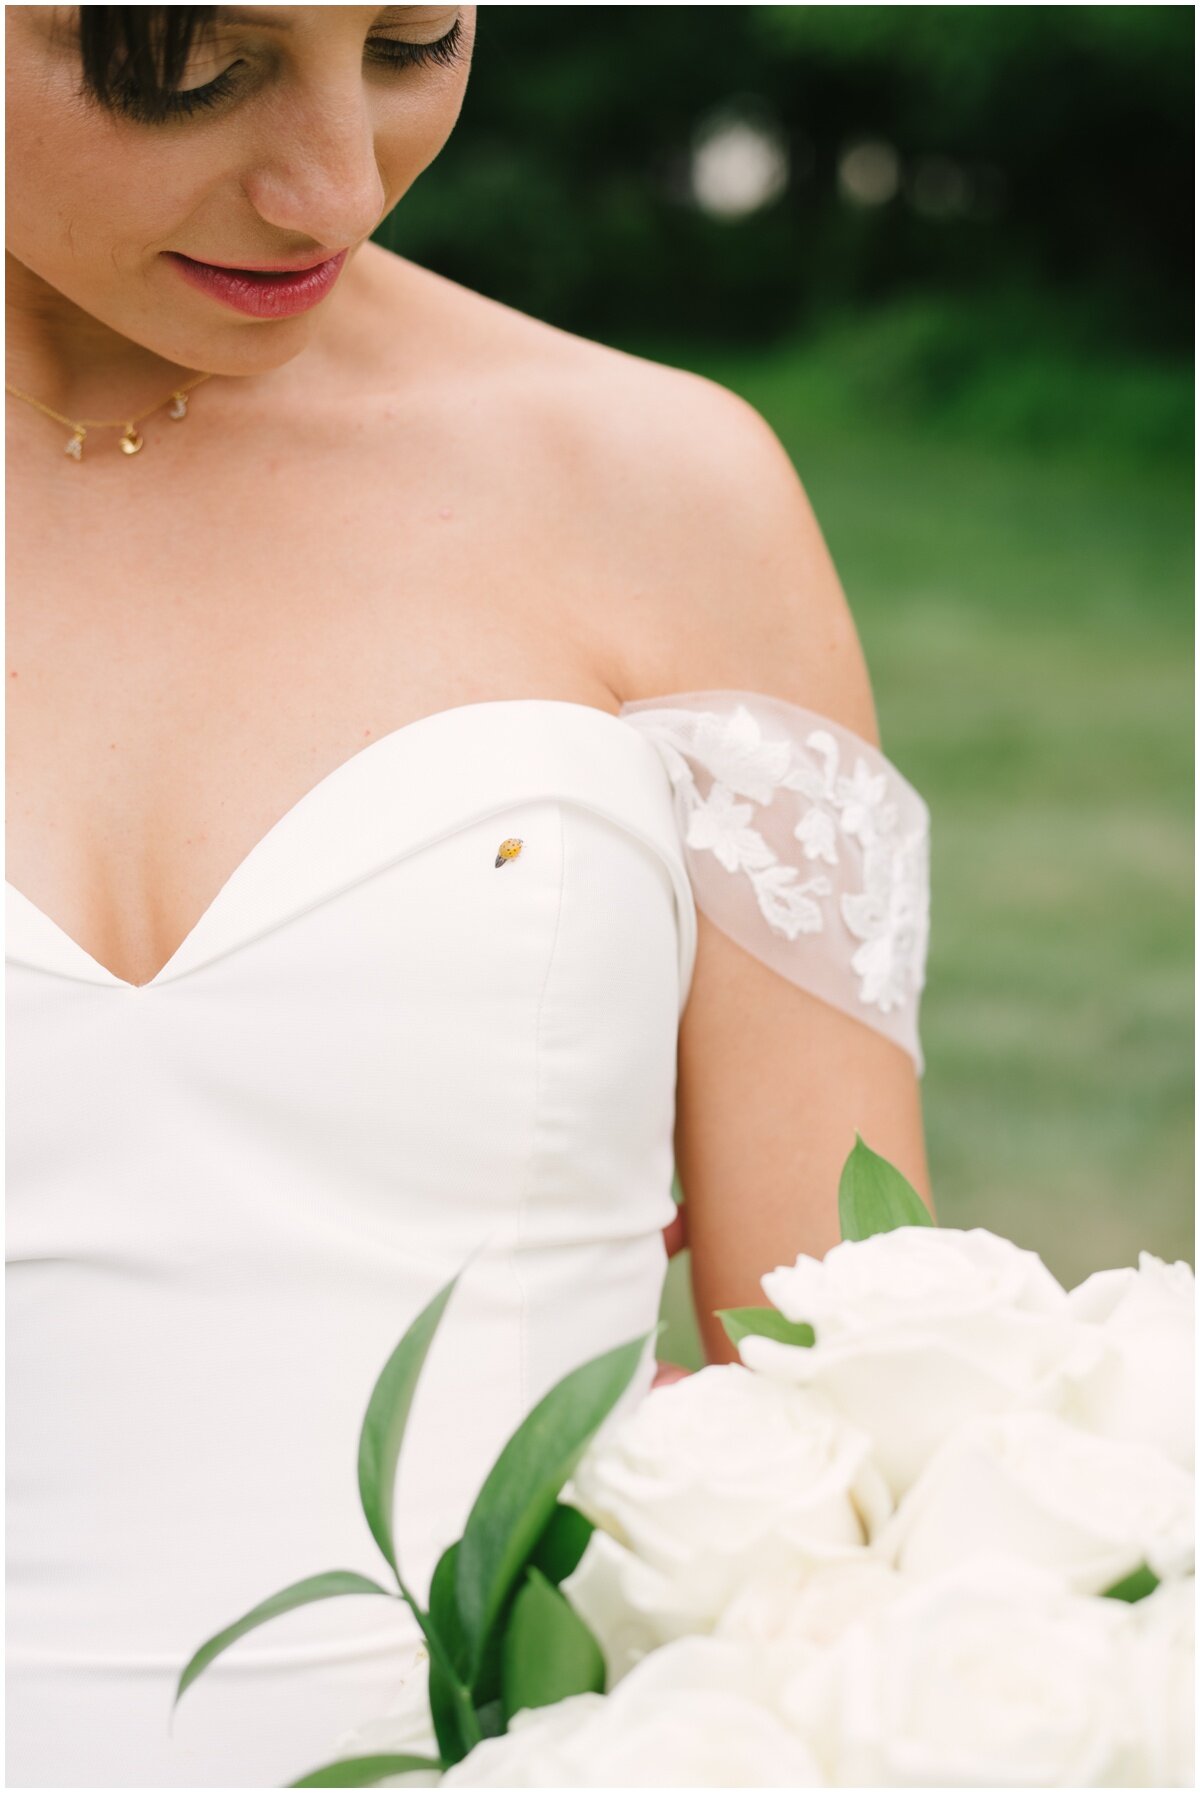  Bride with ladybug on dress during private estate wedding 